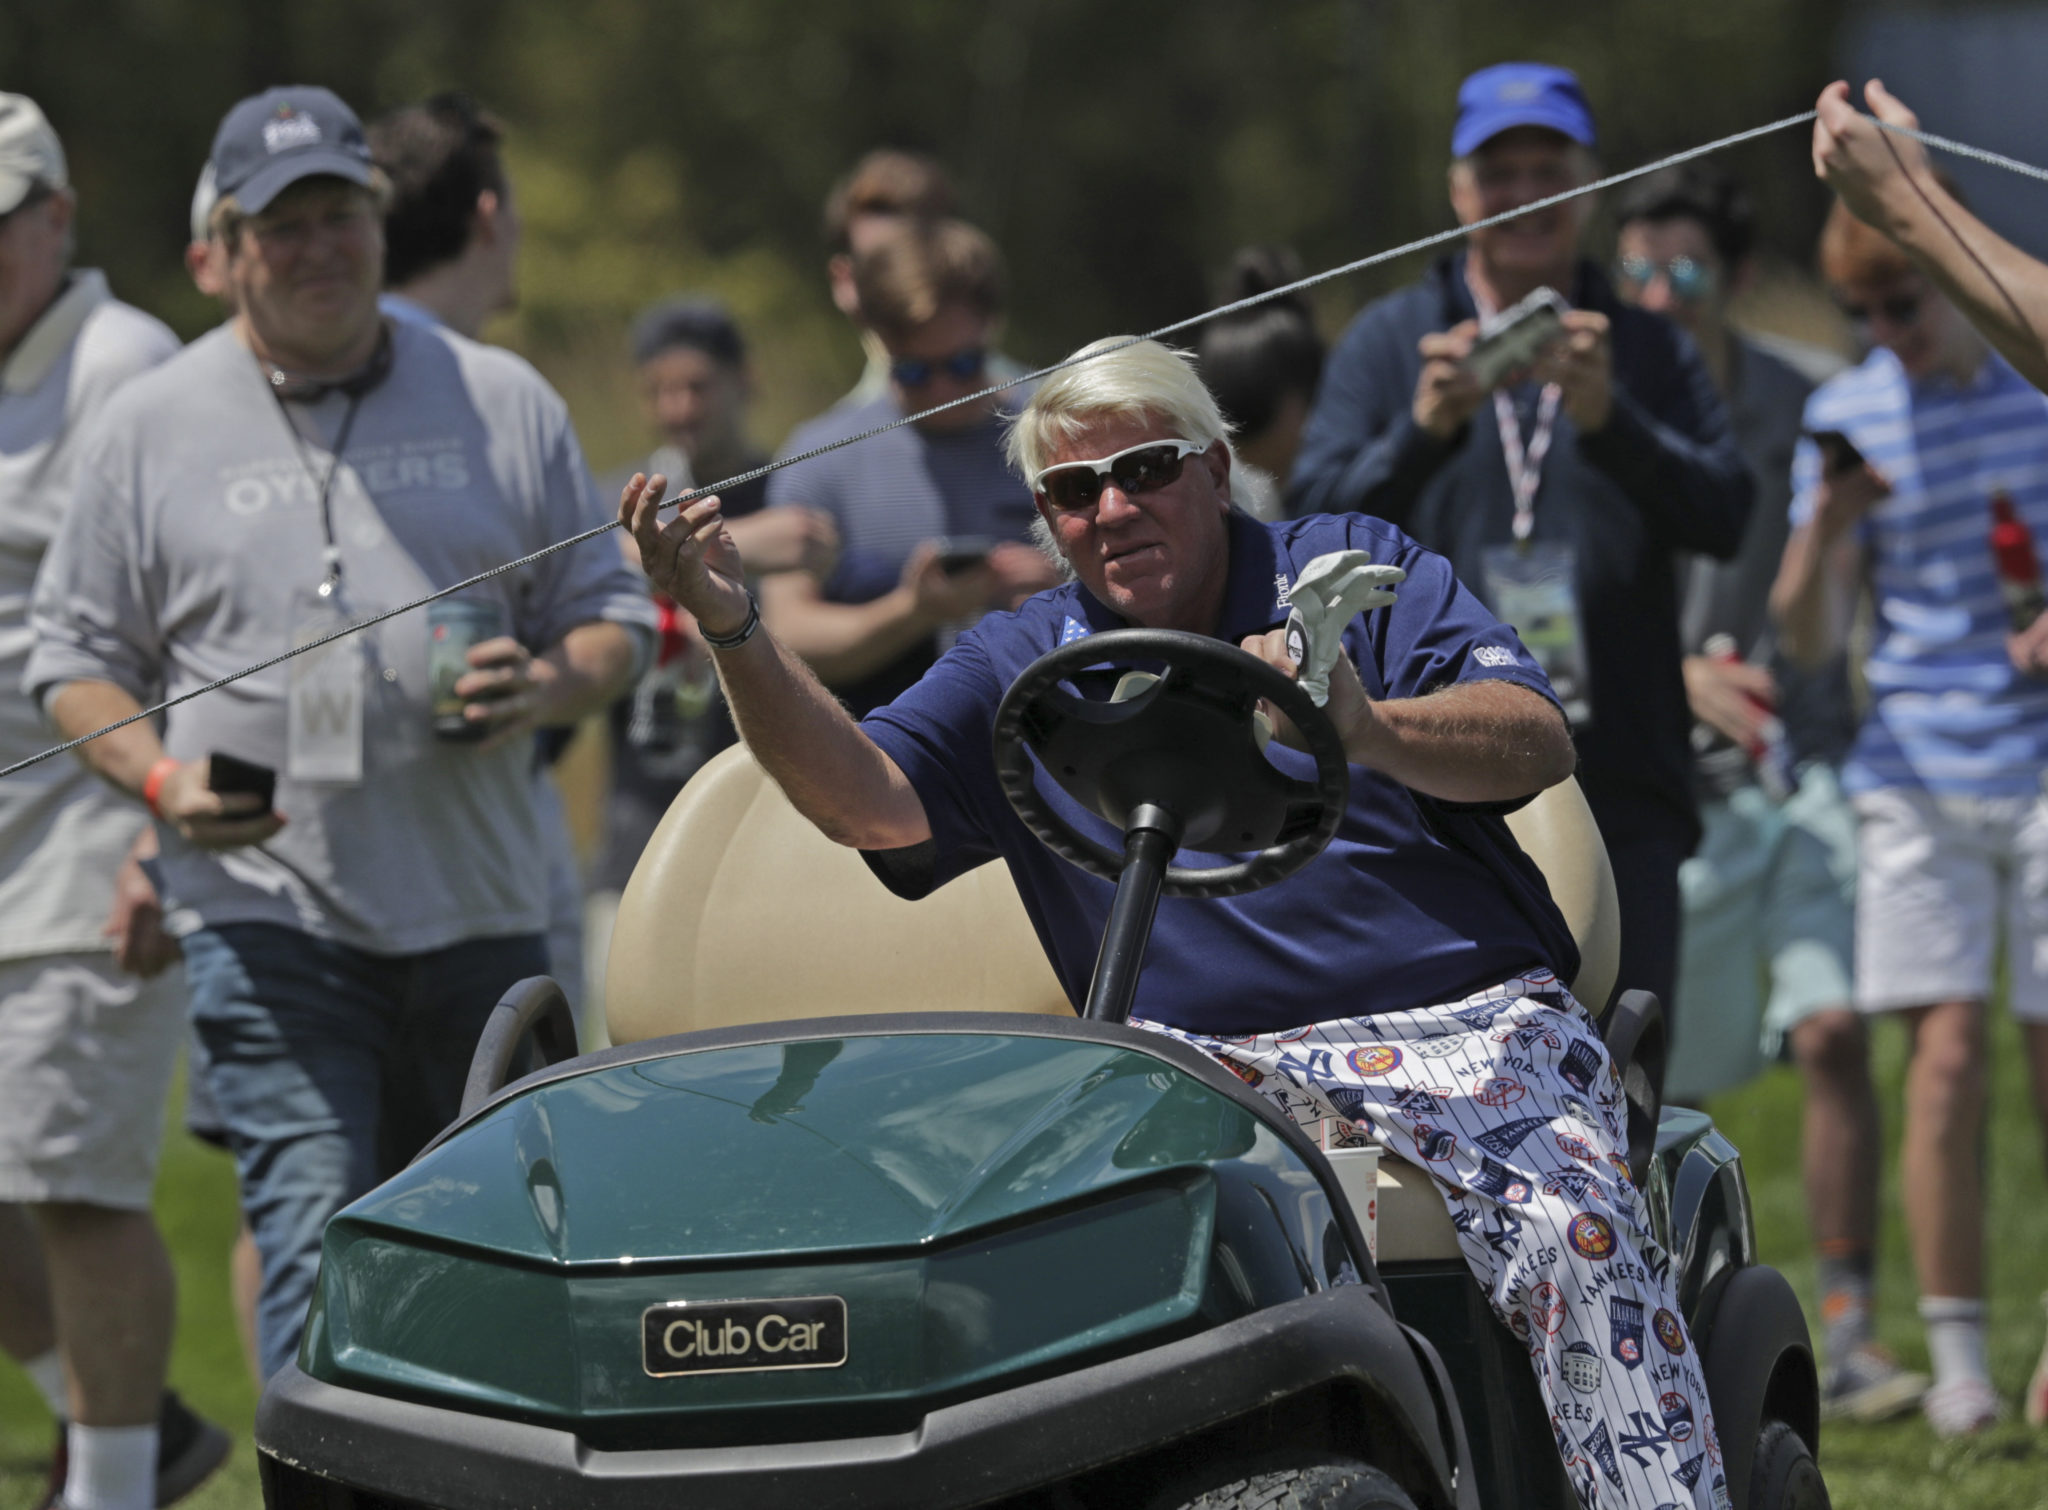 John Daly's request for golf cart at The Open under consideration